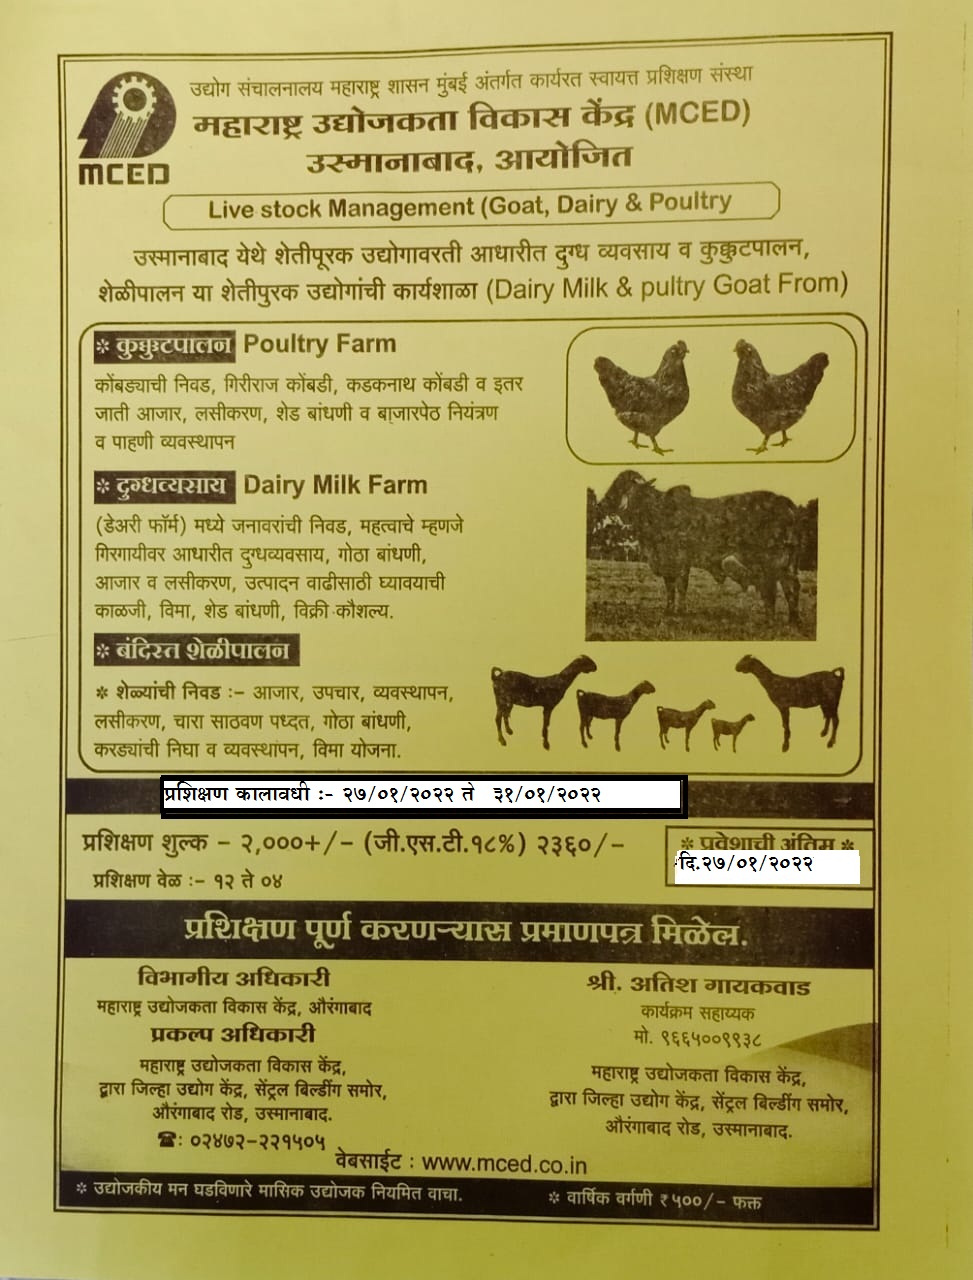 LIVE STOCK MANAGEMENT
(GOAT, DAIRY, POULTRY) OSMANABAD